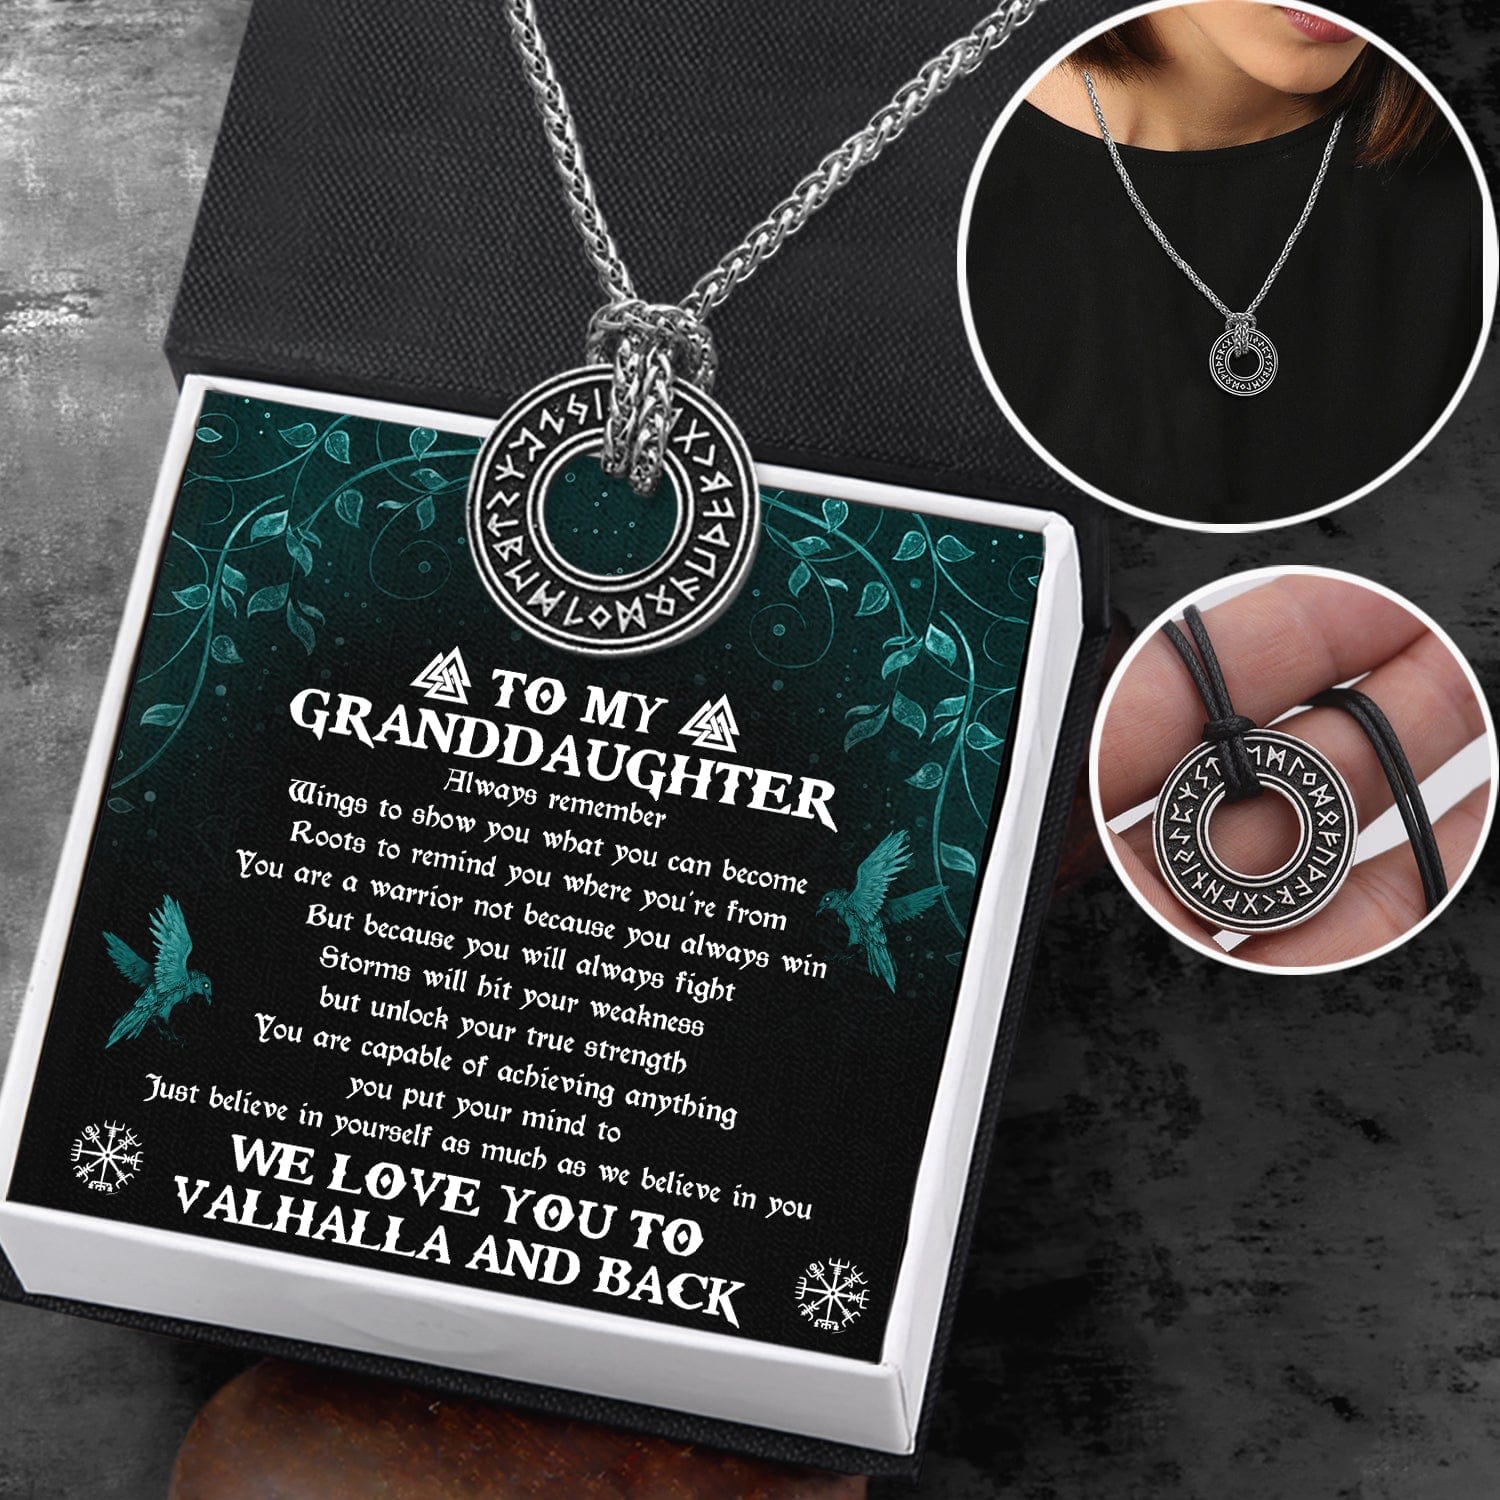 Viking Rune Necklace - Viking - To My Granddaughter - I Love You To Valhalla And Back - Gndy23001